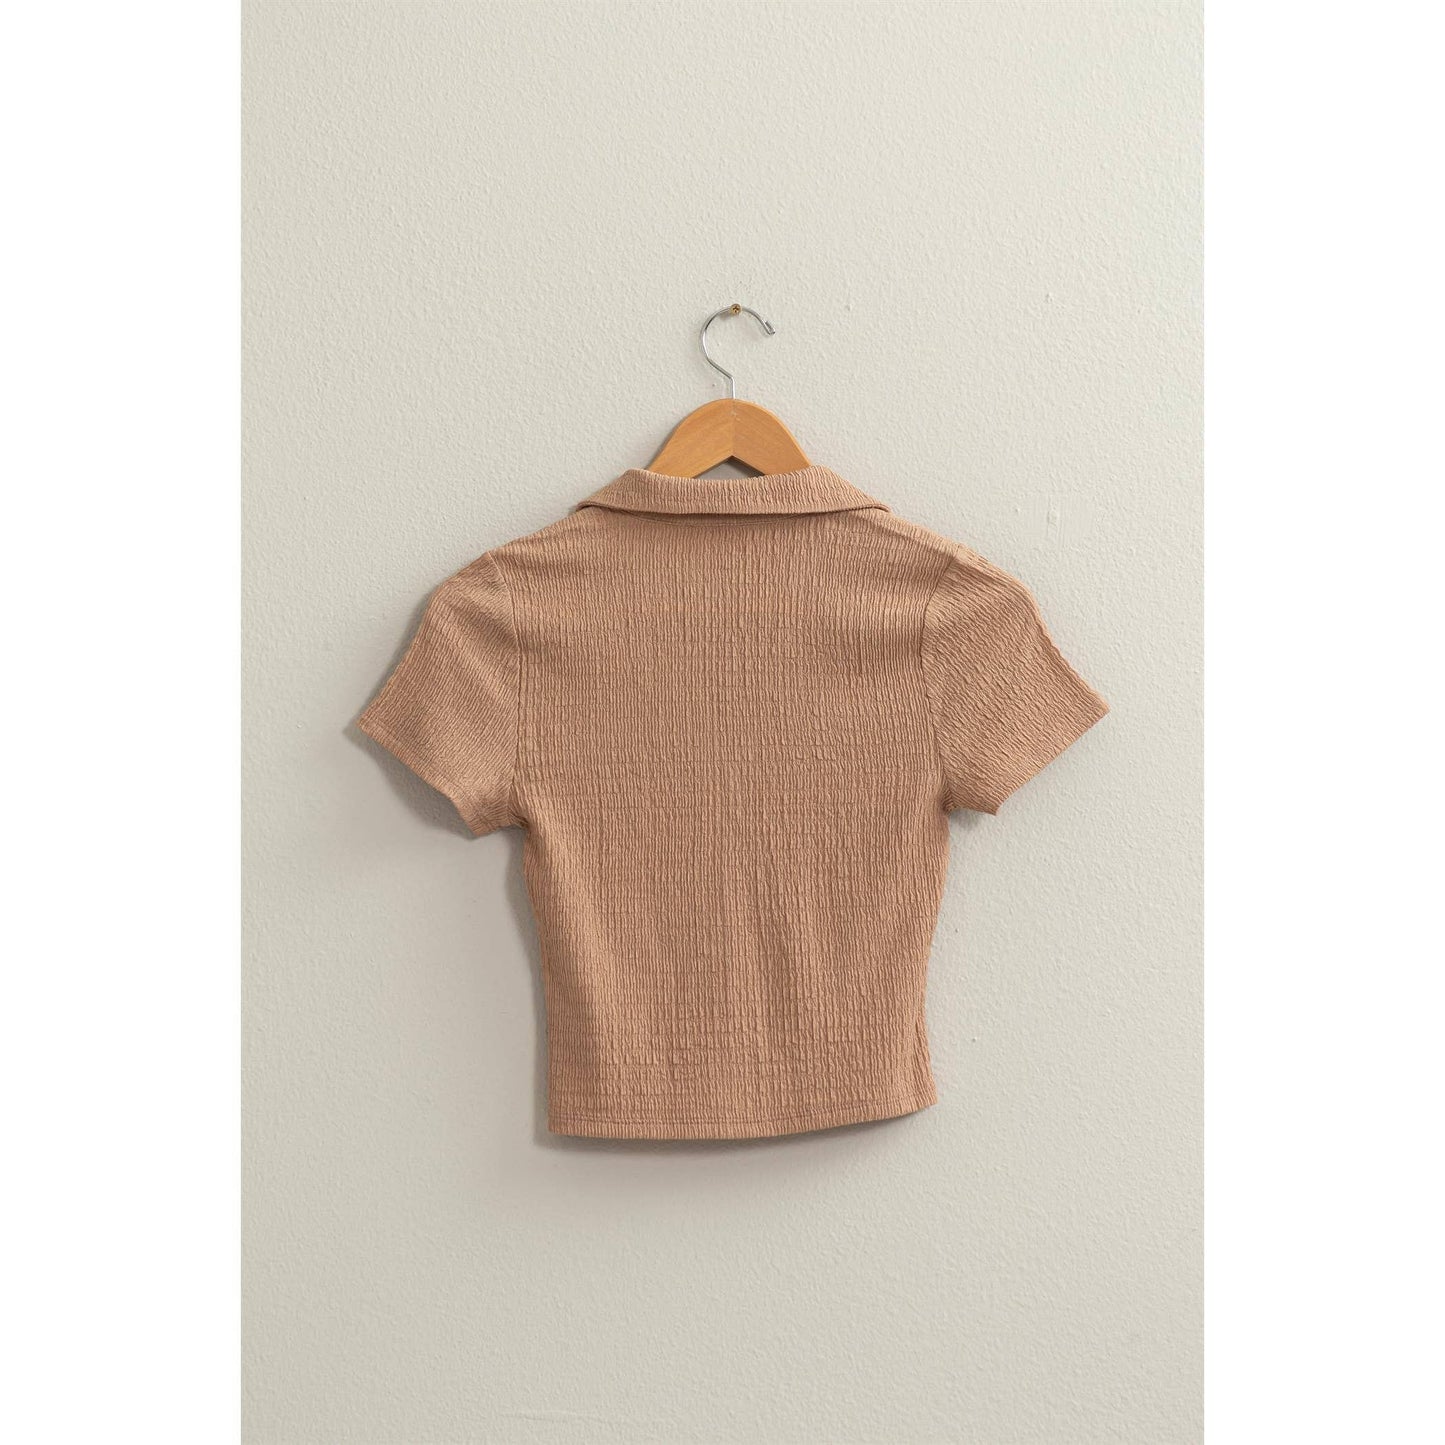 CRINKLE KNIT BUTTON FRONT TOP